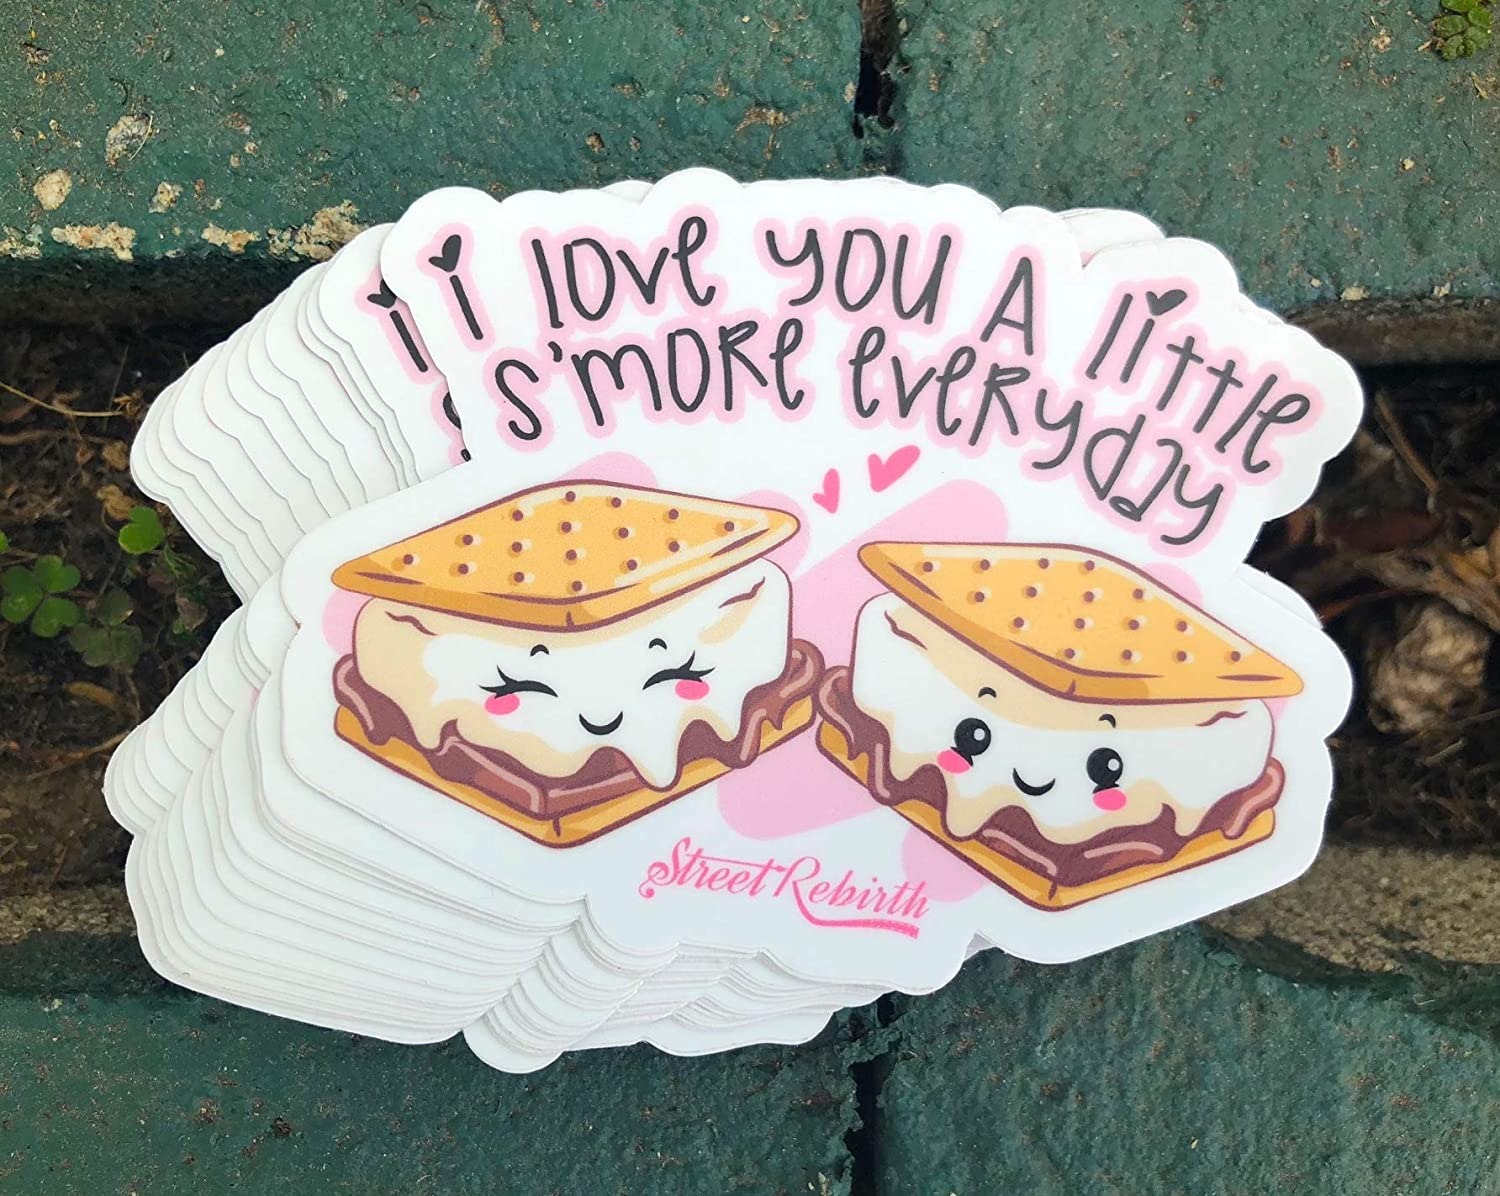 i-love-you-a-little-s-more-everyday-sticker-one-4-inch-waterproof